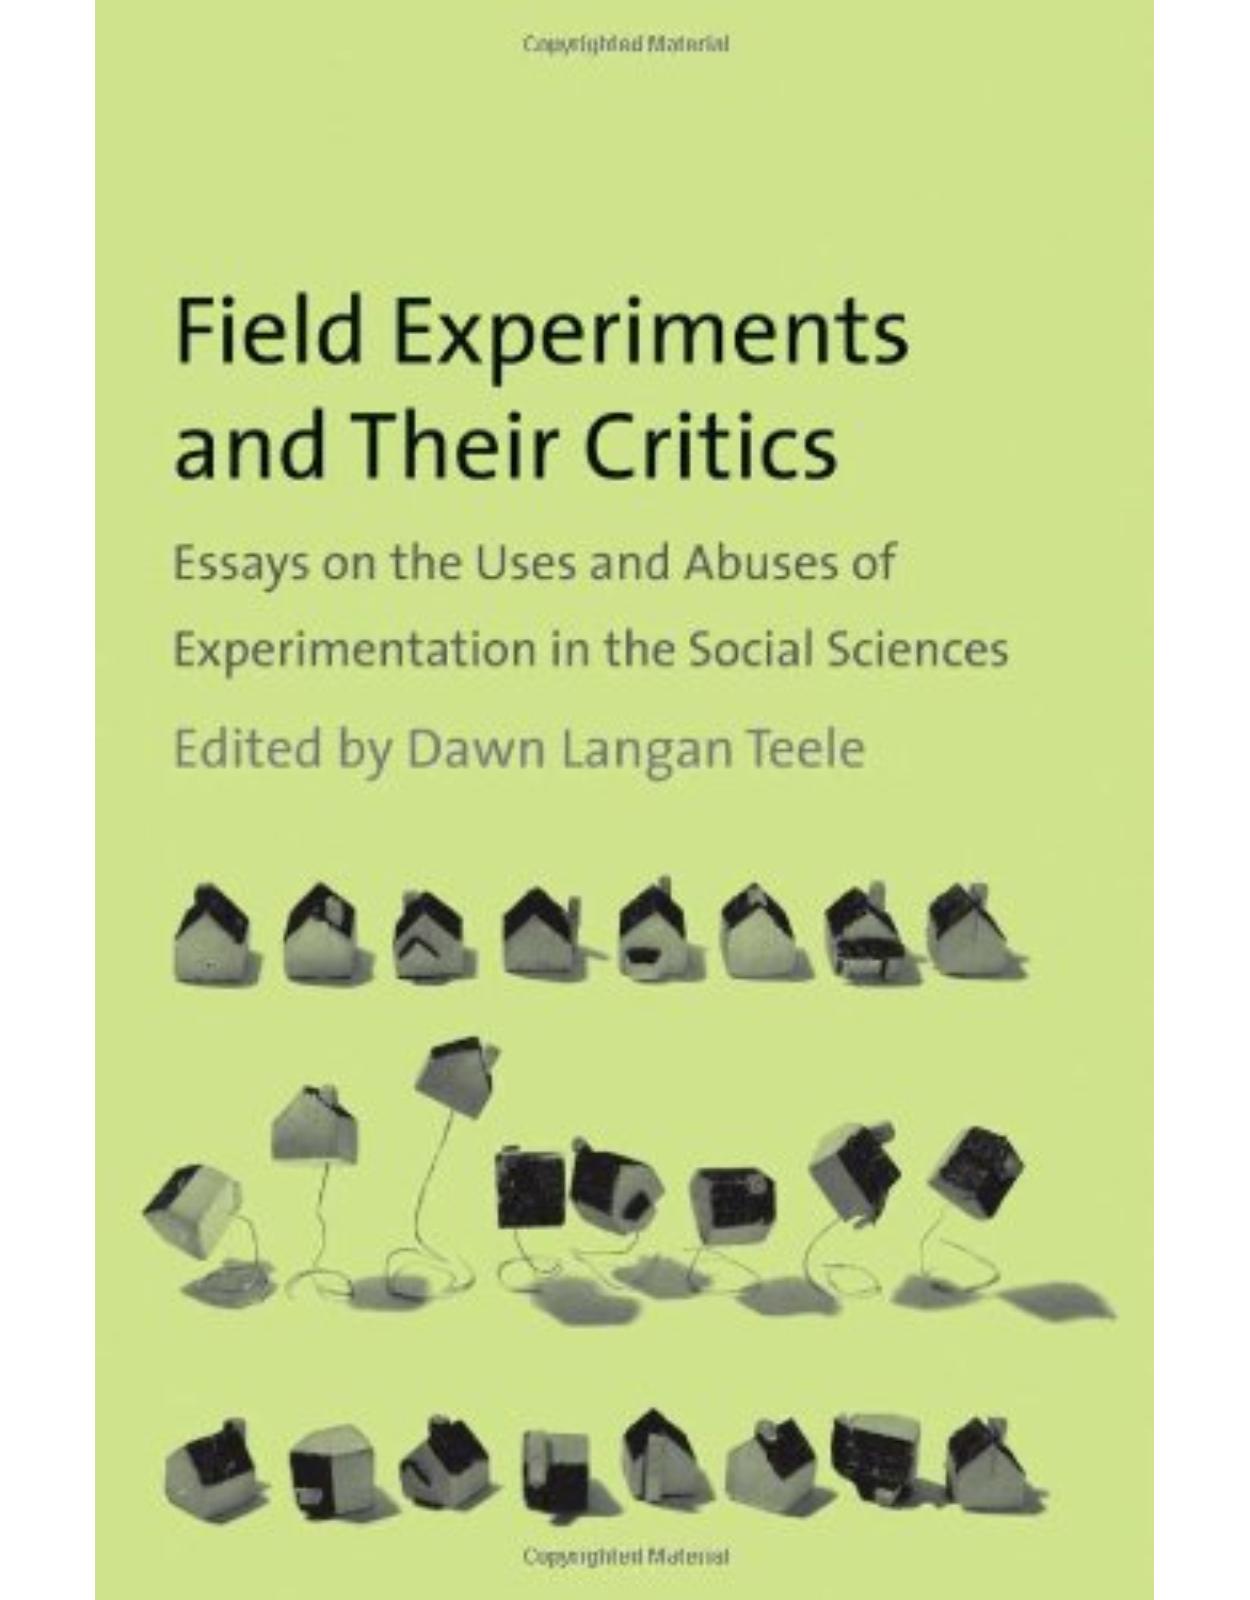 Field Experiments and Their Critics. Essays on the Uses and Abuses of Experimentation in the Social Sciences